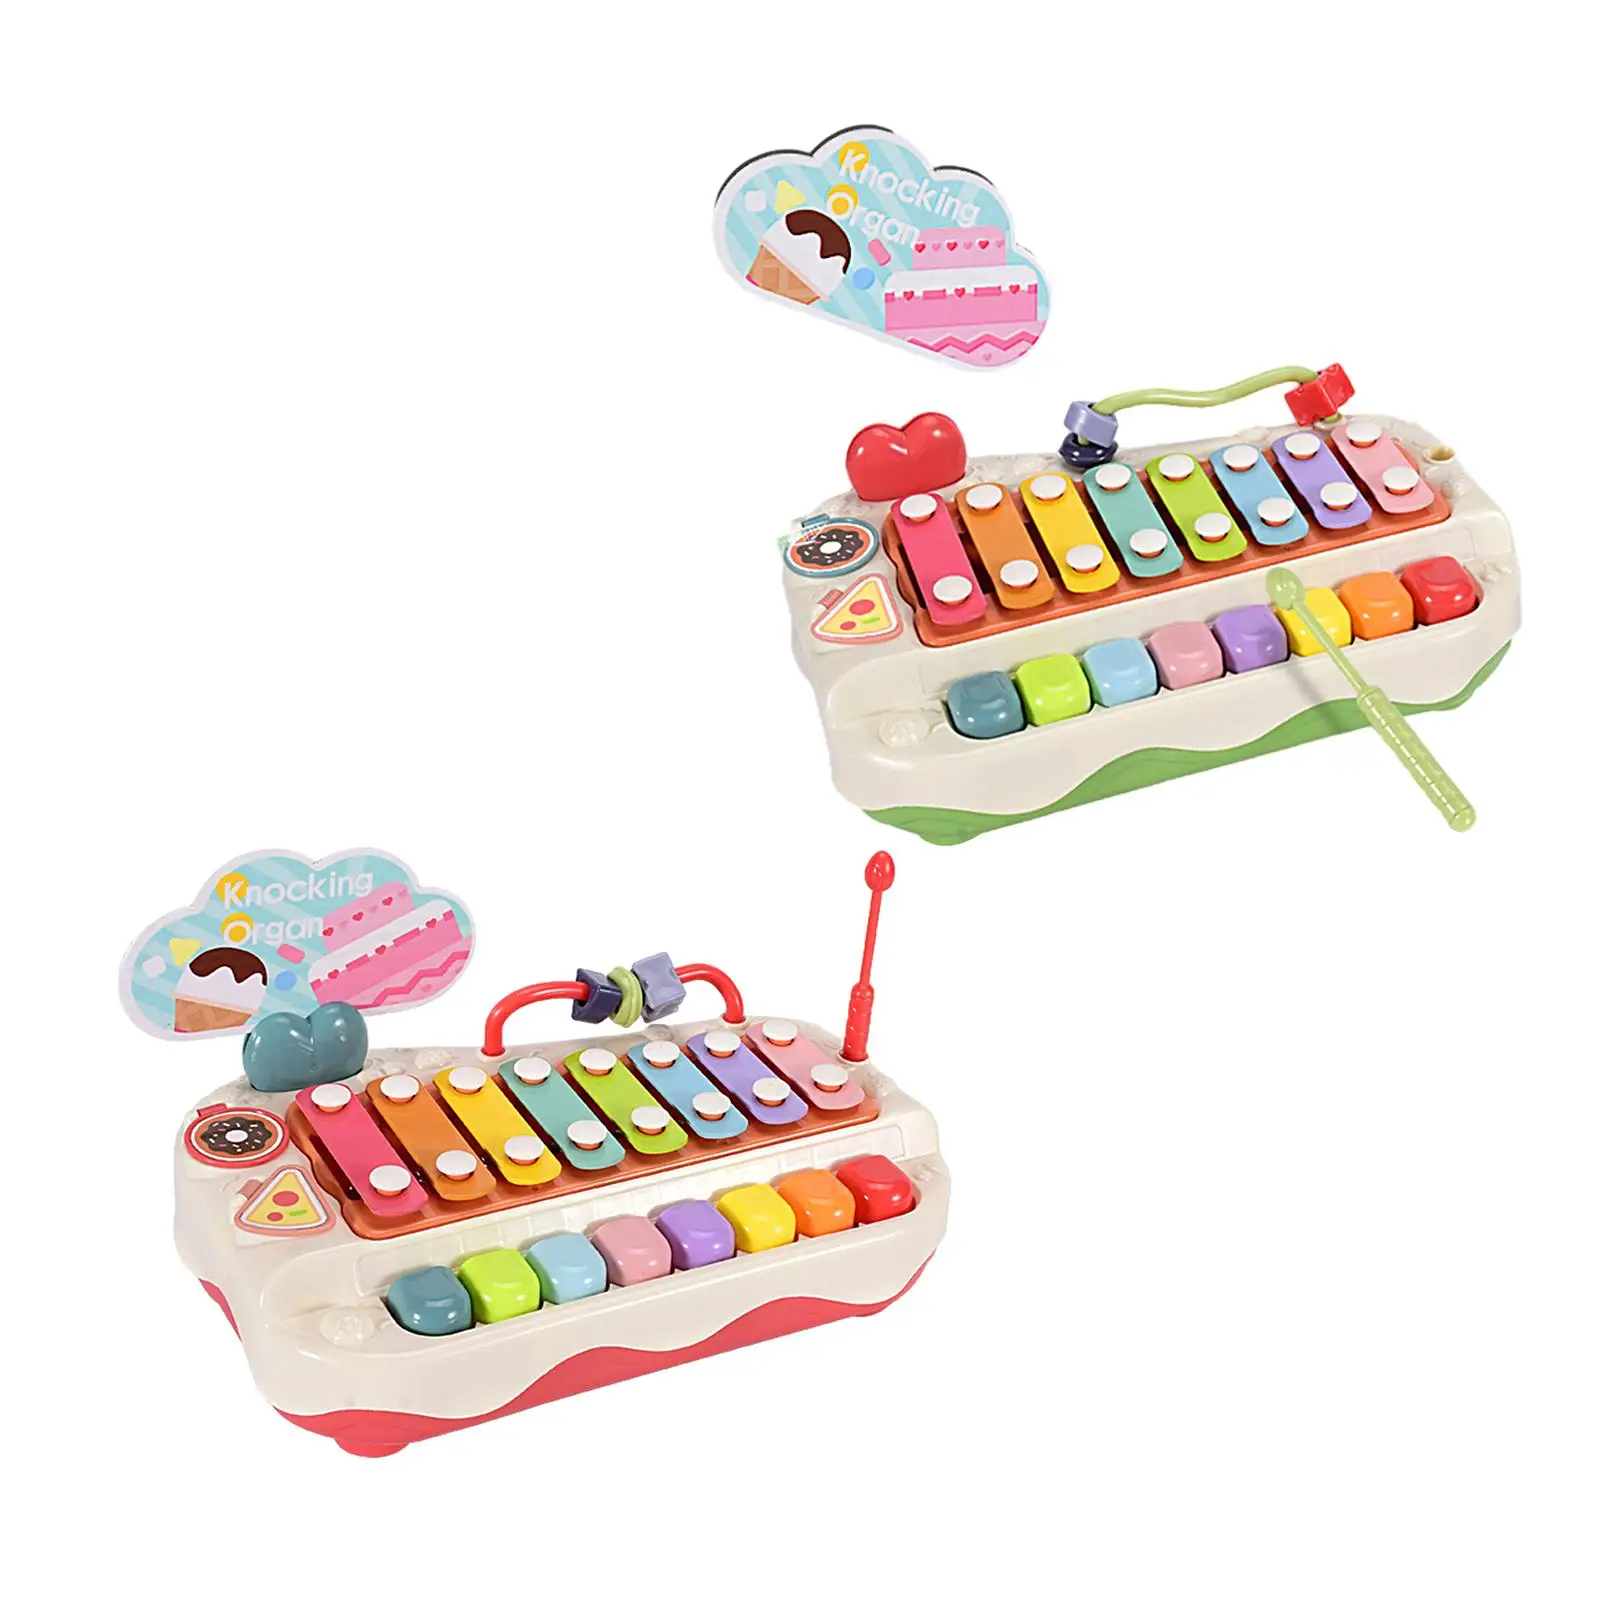 Baby Musical Toy Baby Piano Xylophone Toy Hammering Pounding Toys for Toddler 1 2 3 Years Old Kids Boy Girls Baby Birthday Gift